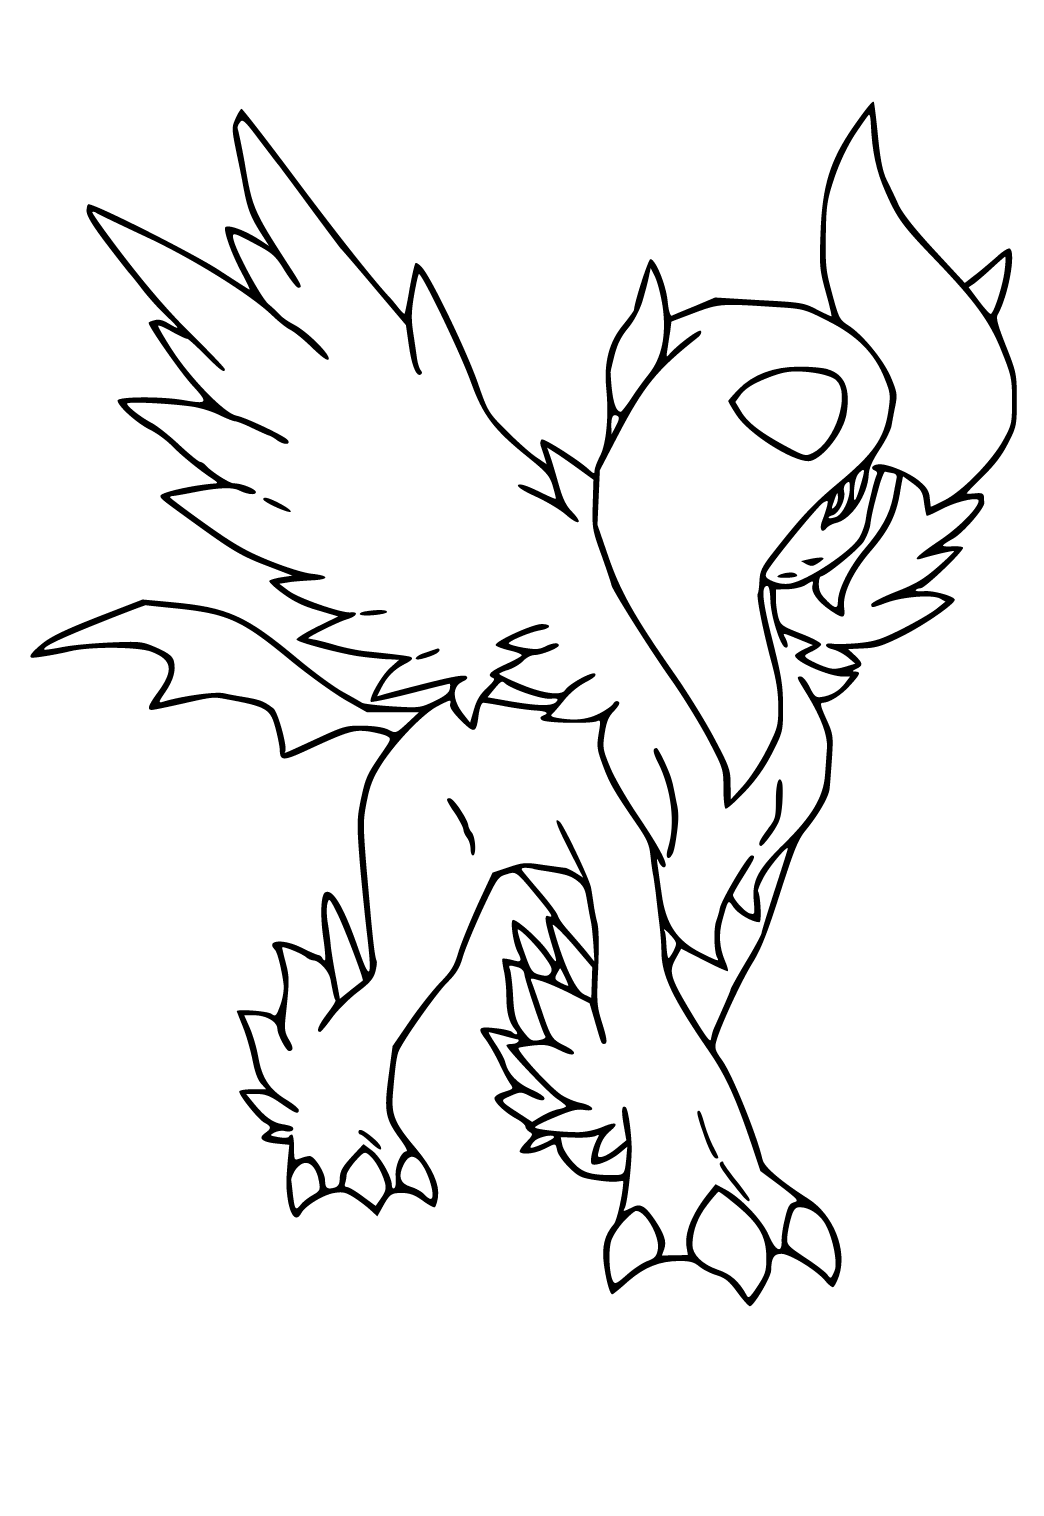 Free printable legendary pokemon dragon coloring page for adults and kids